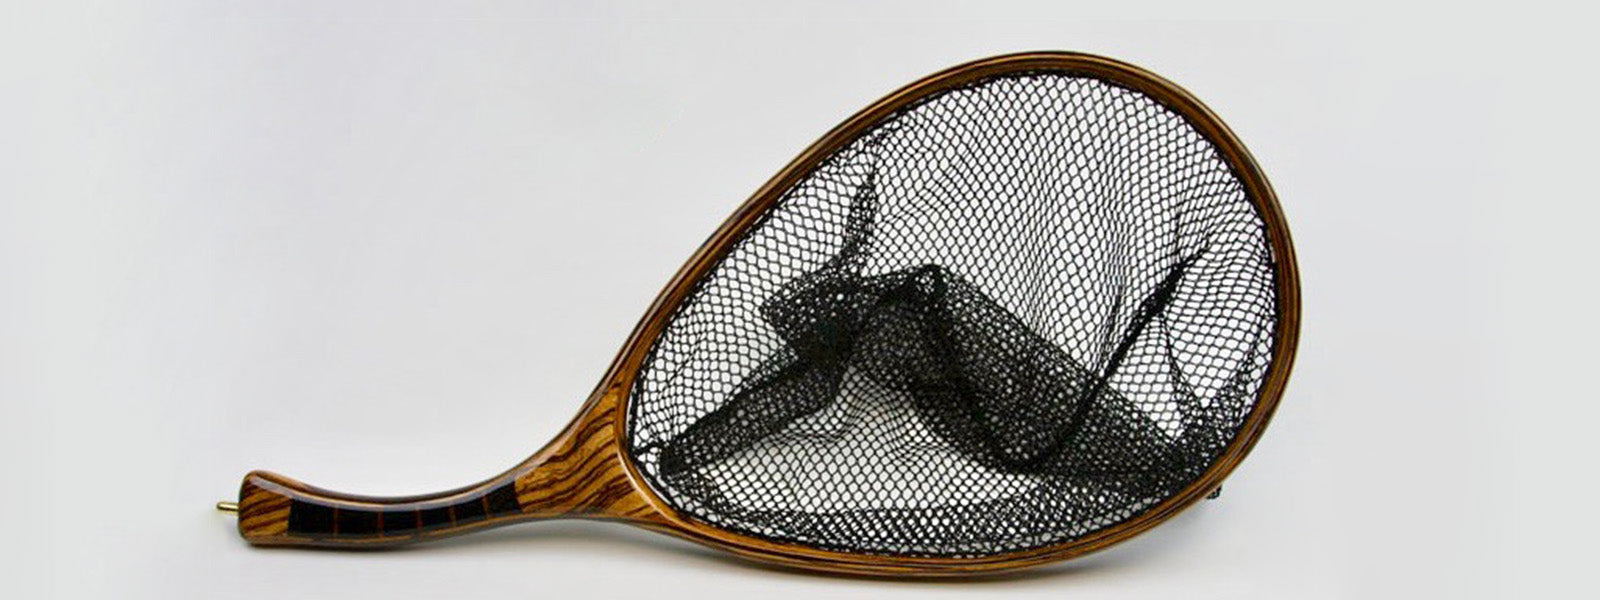 NEWEEN Fly Fishing Net for Catch and Release Fish Landing Net 